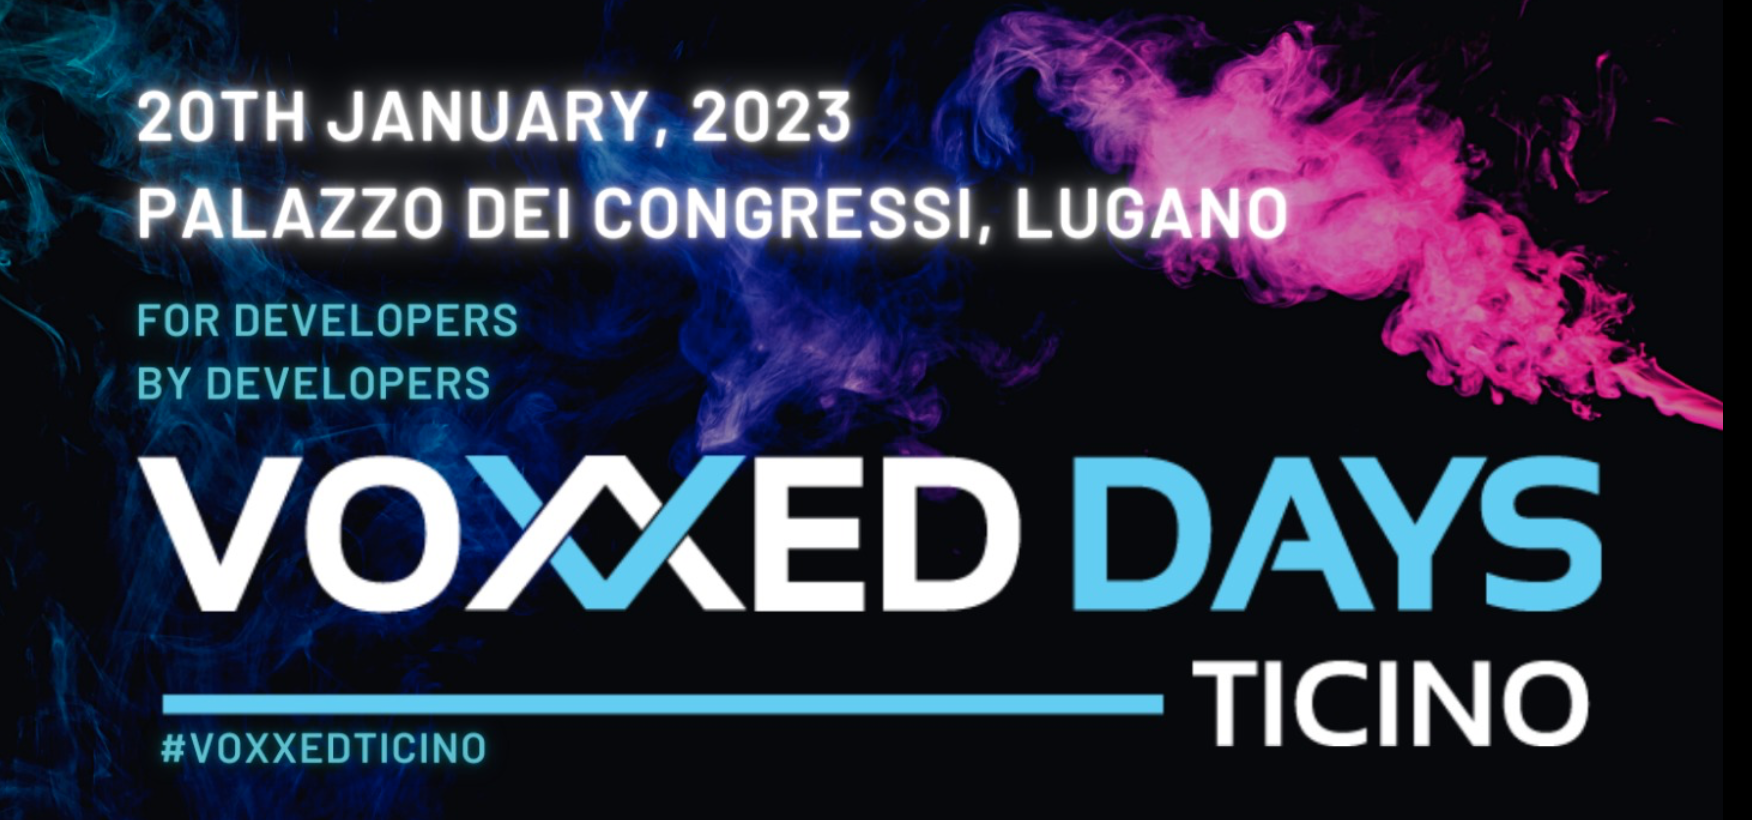 Voxxed Days: the poster and logo of the "Voxxed Days Ticino" 2023